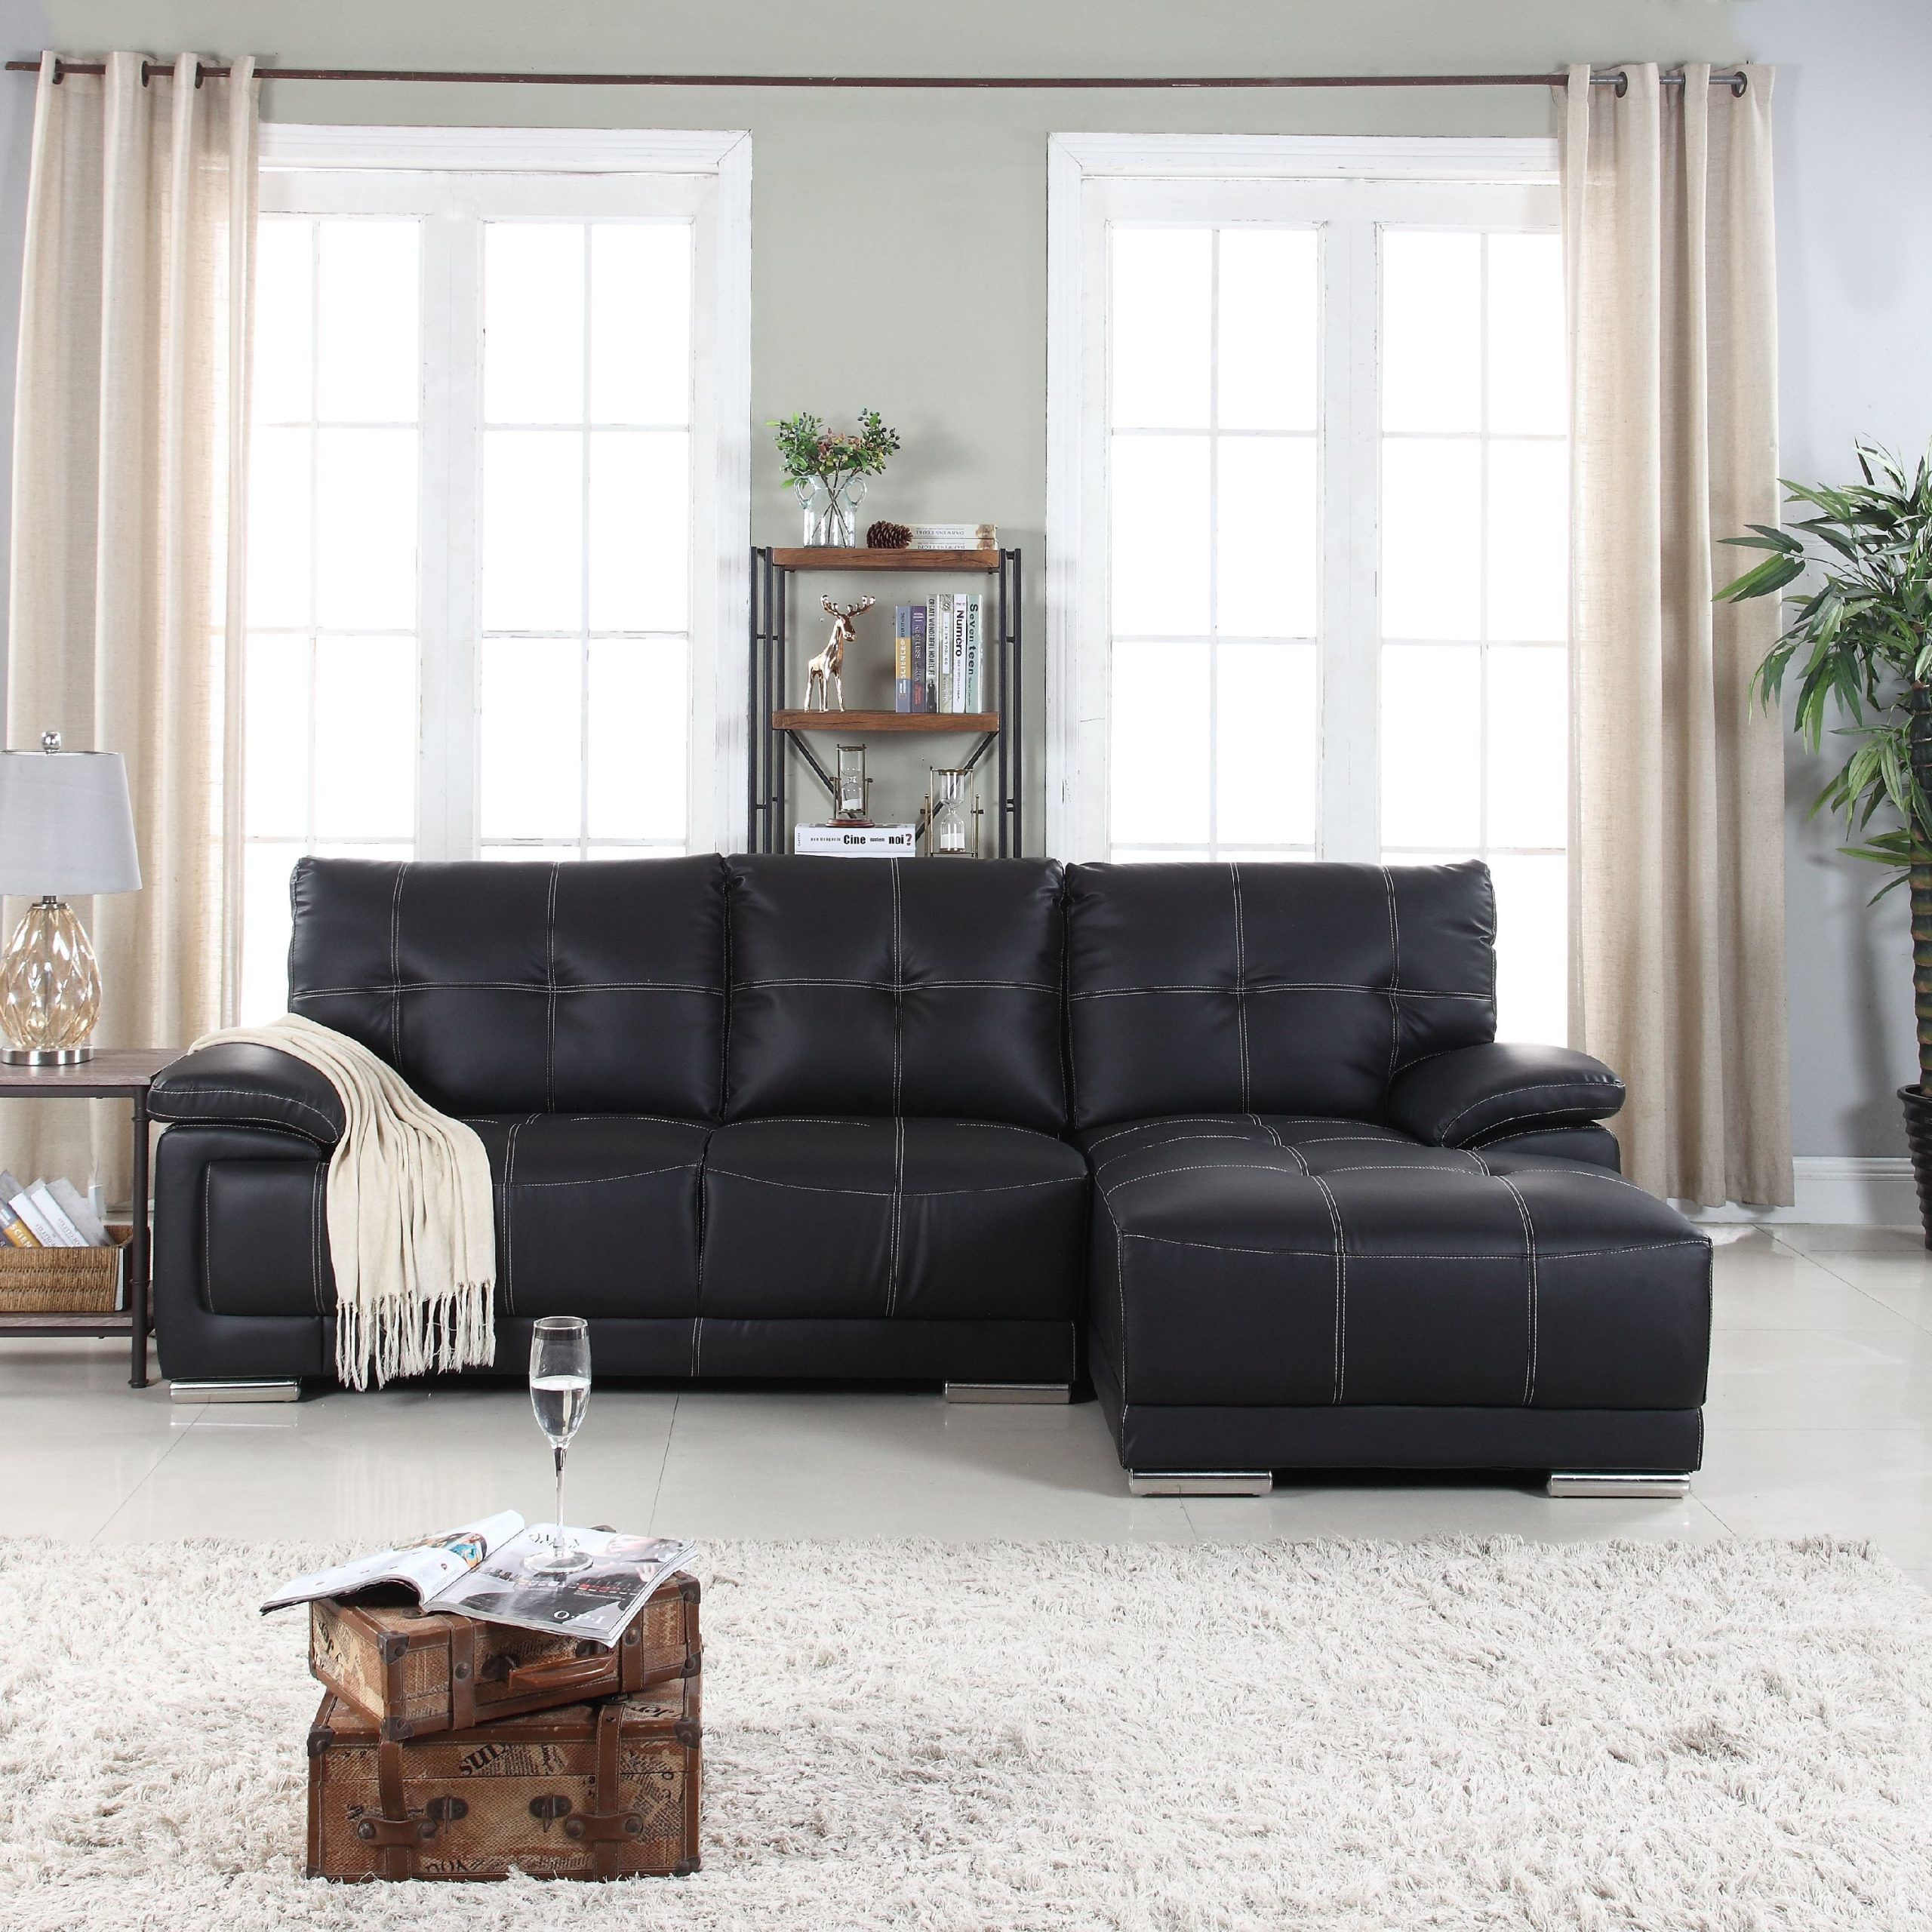 Classic Tufted Faux Leather Sectional Sofa – Walmart For Faux Leather Sectional Sofa Sets (View 17 of 21)